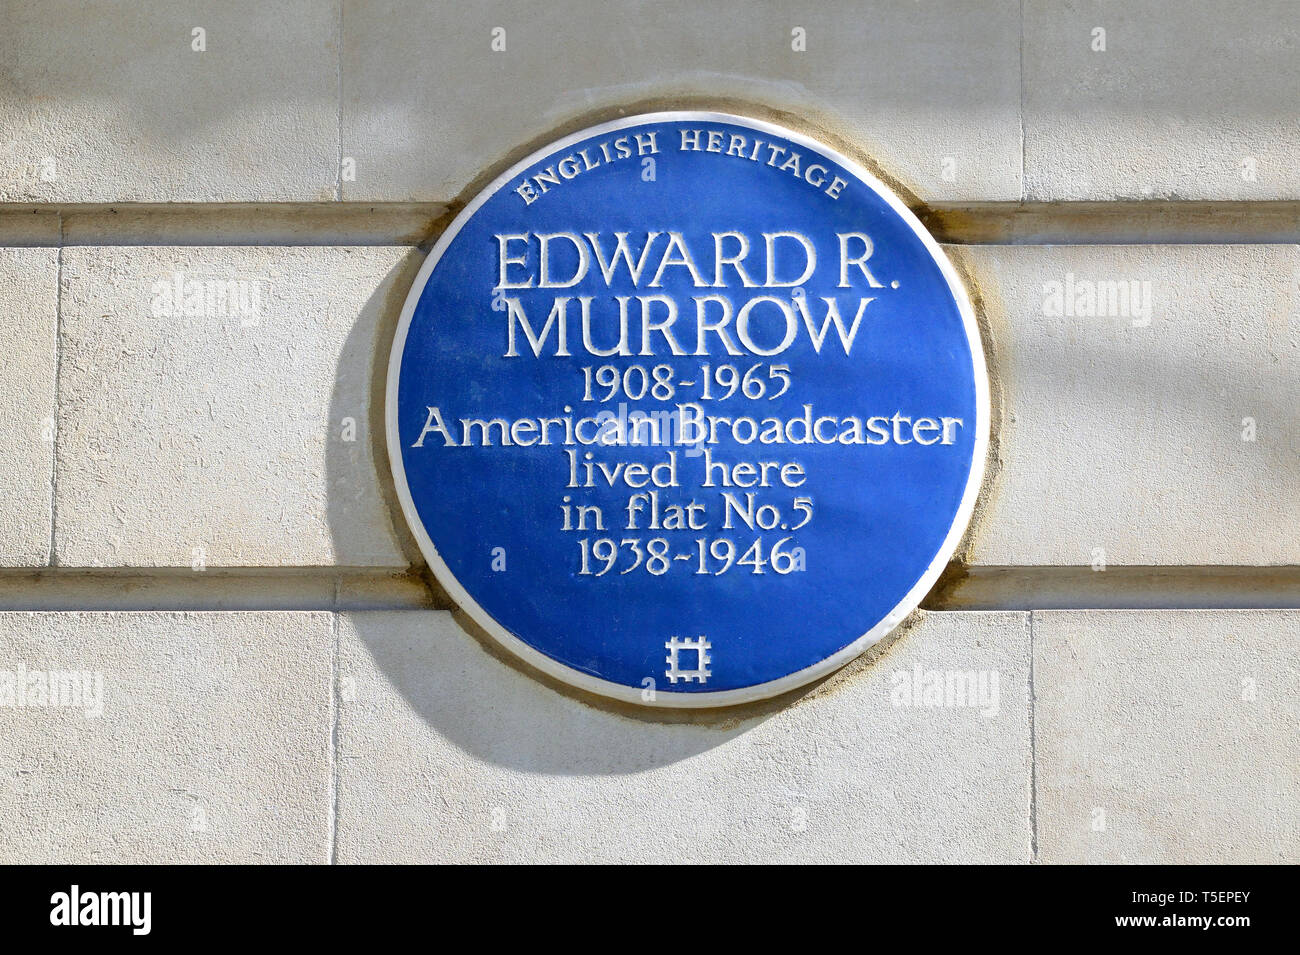 London, England, UK. Commemorative Blue Plaque: Edward R. Murrow (1908-1965) American broadcaster, lived here in flat No.5 (1938-1946) 84 Hallam Stree Stock Photo